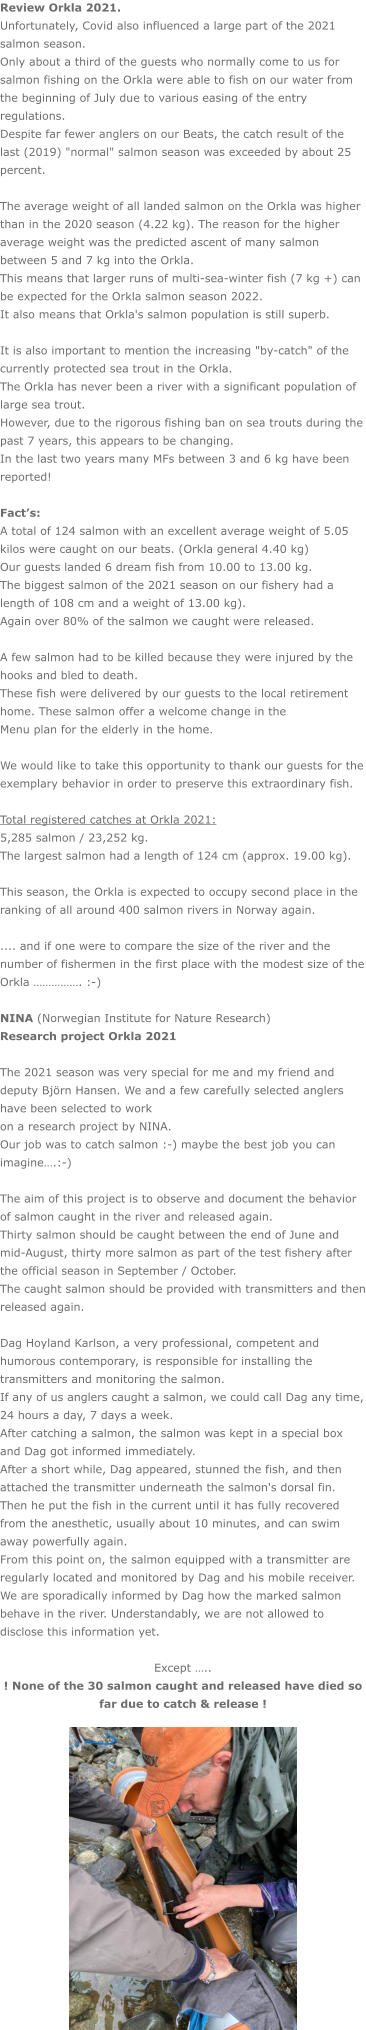 Review Orkla 2021. Unfortunately, Covid also influenced a large part of the 2021 salmon season. Only about a third of the guests who normally come to us for salmon fishing on the Orkla were able to fish on our water from the beginning of July due to various easing of the entry regulations. Despite far fewer anglers on our Beats, the catch result of the last (2019) "normal" salmon season was exceeded by about 25 percent.  The average weight of all landed salmon on the Orkla was higher than in the 2020 season (4.22 kg). The reason for the higher average weight was the predicted ascent of many salmon between 5 and 7 kg into the Orkla. This means that larger runs of multi-sea-winter fish (7 kg +) can be expected for the Orkla salmon season 2022. It also means that Orkla's salmon population is still superb.  It is also important to mention the increasing "by-catch" of the currently protected sea trout in the Orkla. The Orkla has never been a river with a significant population of large sea trout. However, due to the rigorous fishing ban on sea trouts during the past 7 years, this appears to be changing.  In the last two years many MFs between 3 and 6 kg have been reported!  Fact’s: A total of 124 salmon with an excellent average weight of 5.05 kilos were caught on our beats. (Orkla general 4.40 kg) Our guests landed 6 dream fish from 10.00 to 13.00 kg. The biggest salmon of the 2021 season on our fishery had a length of 108 cm and a weight of 13.00 kg). Again over 80% of the salmon we caught were released.  A few salmon had to be killed because they were injured by the hooks and bled to death. These fish were delivered by our guests to the local retirement home. These salmon offer a welcome change in the Menu plan for the elderly in the home.  We would like to take this opportunity to thank our guests for the exemplary behavior in order to preserve this extraordinary fish.  Total registered catches at Orkla 2021: 5,285 salmon / 23,252 kg. The largest salmon had a length of 124 cm (approx. 19.00 kg).  This season, the Orkla is expected to occupy second place in the ranking of all around 400 salmon rivers in Norway again.  .... and if one were to compare the size of the river and the number of fishermen in the first place with the modest size of the Orkla ……………. :-)  NINA (Norwegian Institute for Nature Research) Research project Orkla 2021  The 2021 season was very special for me and my friend and deputy Björn Hansen. We and a few carefully selected anglers have been selected to work  on a research project by NINA. Our job was to catch salmon :-) maybe the best job you can imagine….:-)  The aim of this project is to observe and document the behavior of salmon caught in the river and released again. Thirty salmon should be caught between the end of June and mid-August, thirty more salmon as part of the test fishery after the official season in September / October. The caught salmon should be provided with transmitters and then released again.  Dag Hoyland Karlson, a very professional, competent and humorous contemporary, is responsible for installing the transmitters and monitoring the salmon. If any of us anglers caught a salmon, we could call Dag any time, 24 hours a day, 7 days a week. After catching a salmon, the salmon was kept in a special box and Dag got informed immediately.  After a short while, Dag appeared, stunned the fish, and then attached the transmitter underneath the salmon's dorsal fin. Then he put the fish in the current until it has fully recovered from the anesthetic, usually about 10 minutes, and can swim away powerfully again.  From this point on, the salmon equipped with a transmitter are regularly located and monitored by Dag and his mobile receiver. We are sporadically informed by Dag how the marked salmon behave in the river. Understandably, we are not allowed to disclose this information yet.  Except ….. ! None of the 30 salmon caught and released have died so far due to catch & release !